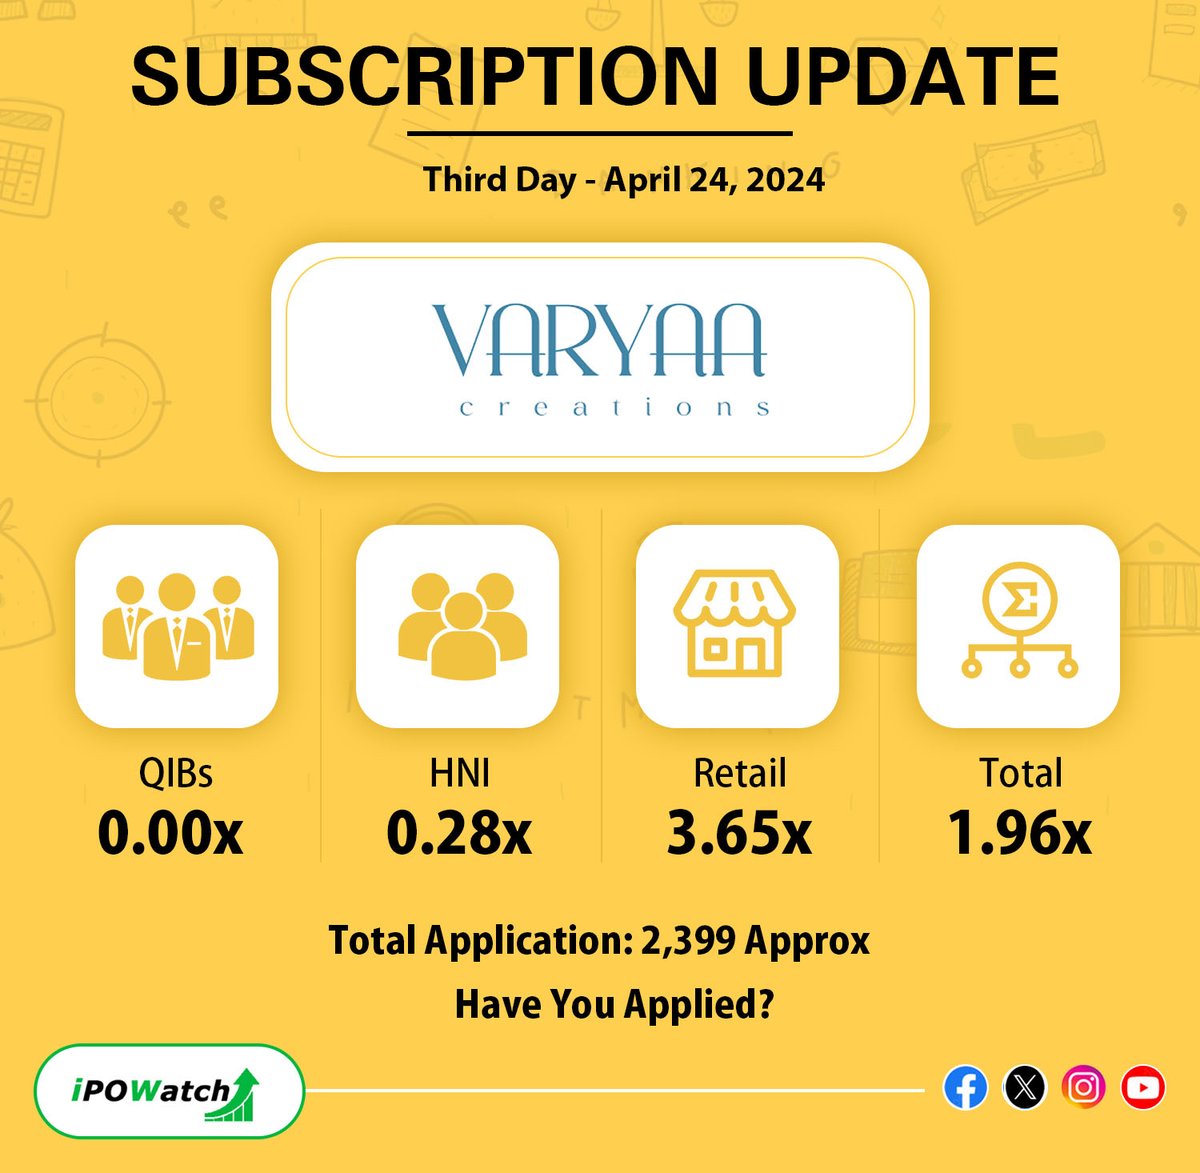 ⮞IPO Alert 🔔

🔸 IPO Subscription Update🔔

Have you Applied for the IPO?

Stay Connected 🤝 with us for all the IPO-related updates 💪

#IPOWatch #ipoupdates #iposubscription #iponews #todaysnews #ipoallotment #ipolisting #ipoalert #ipo #sharemarket